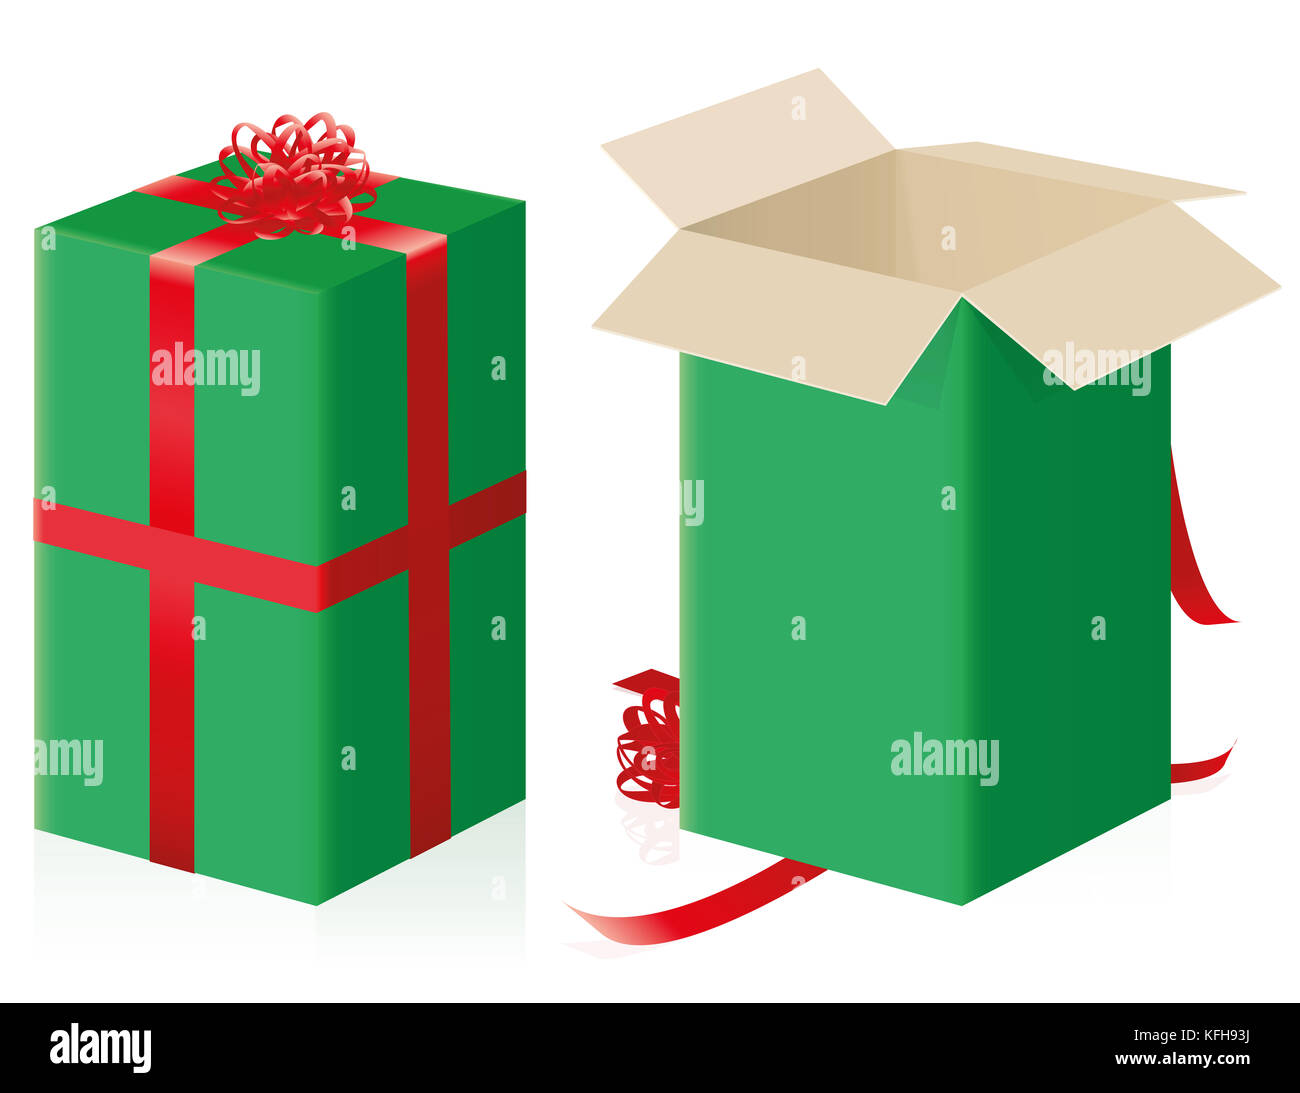 Closed an opened gift package - high size parcel with green wrapping paper and red ribbons - illustration on white background. Stock Photo